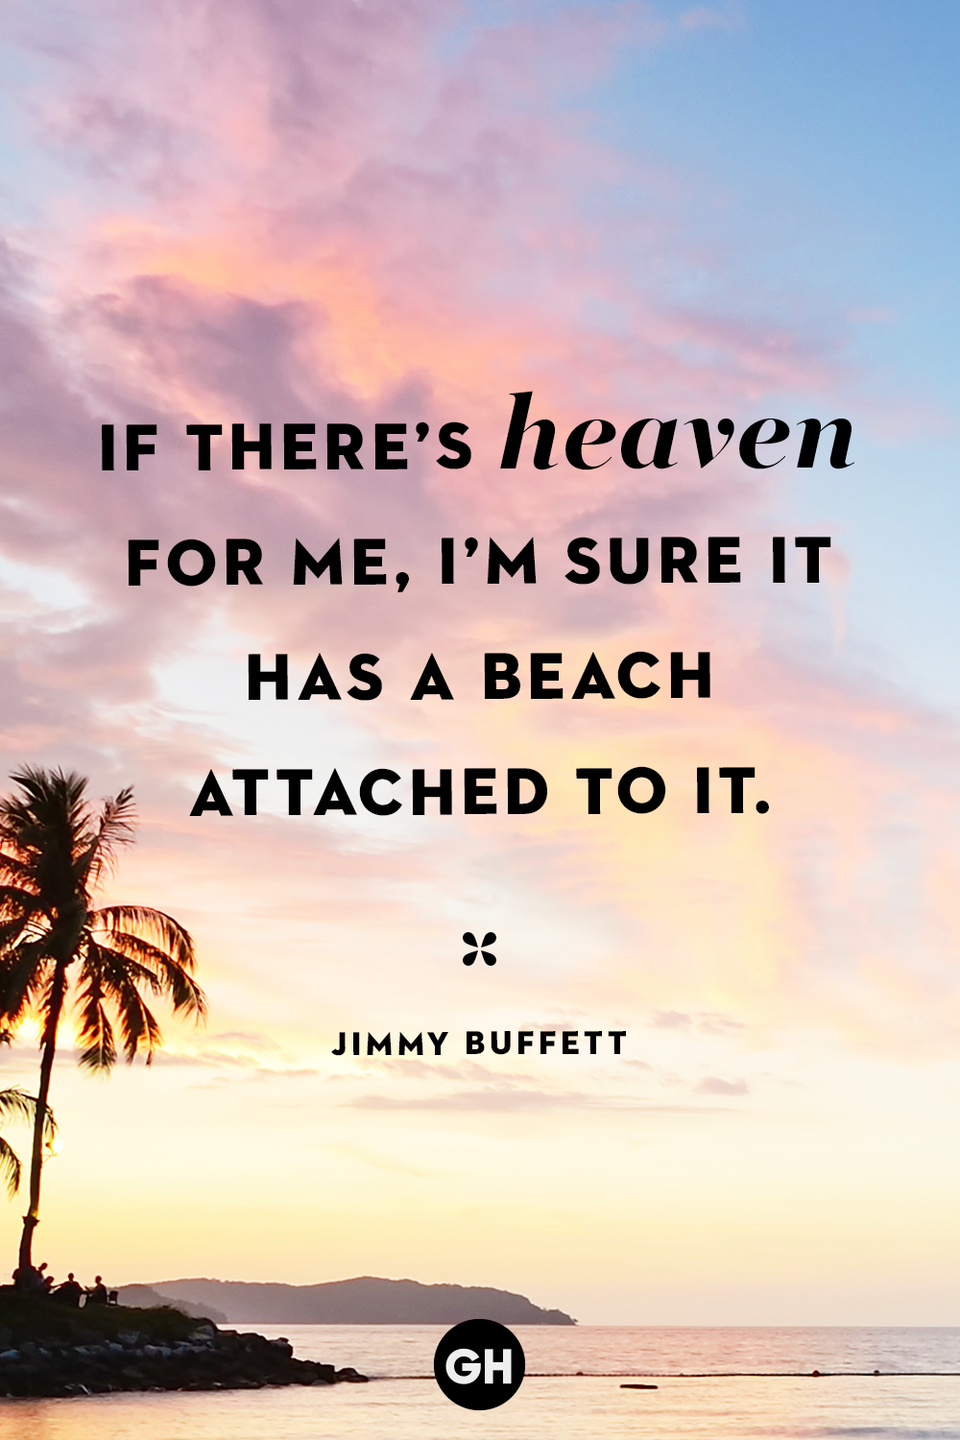 <p>If there’s heaven for me, I’m sure it has a beach attached to it.</p>